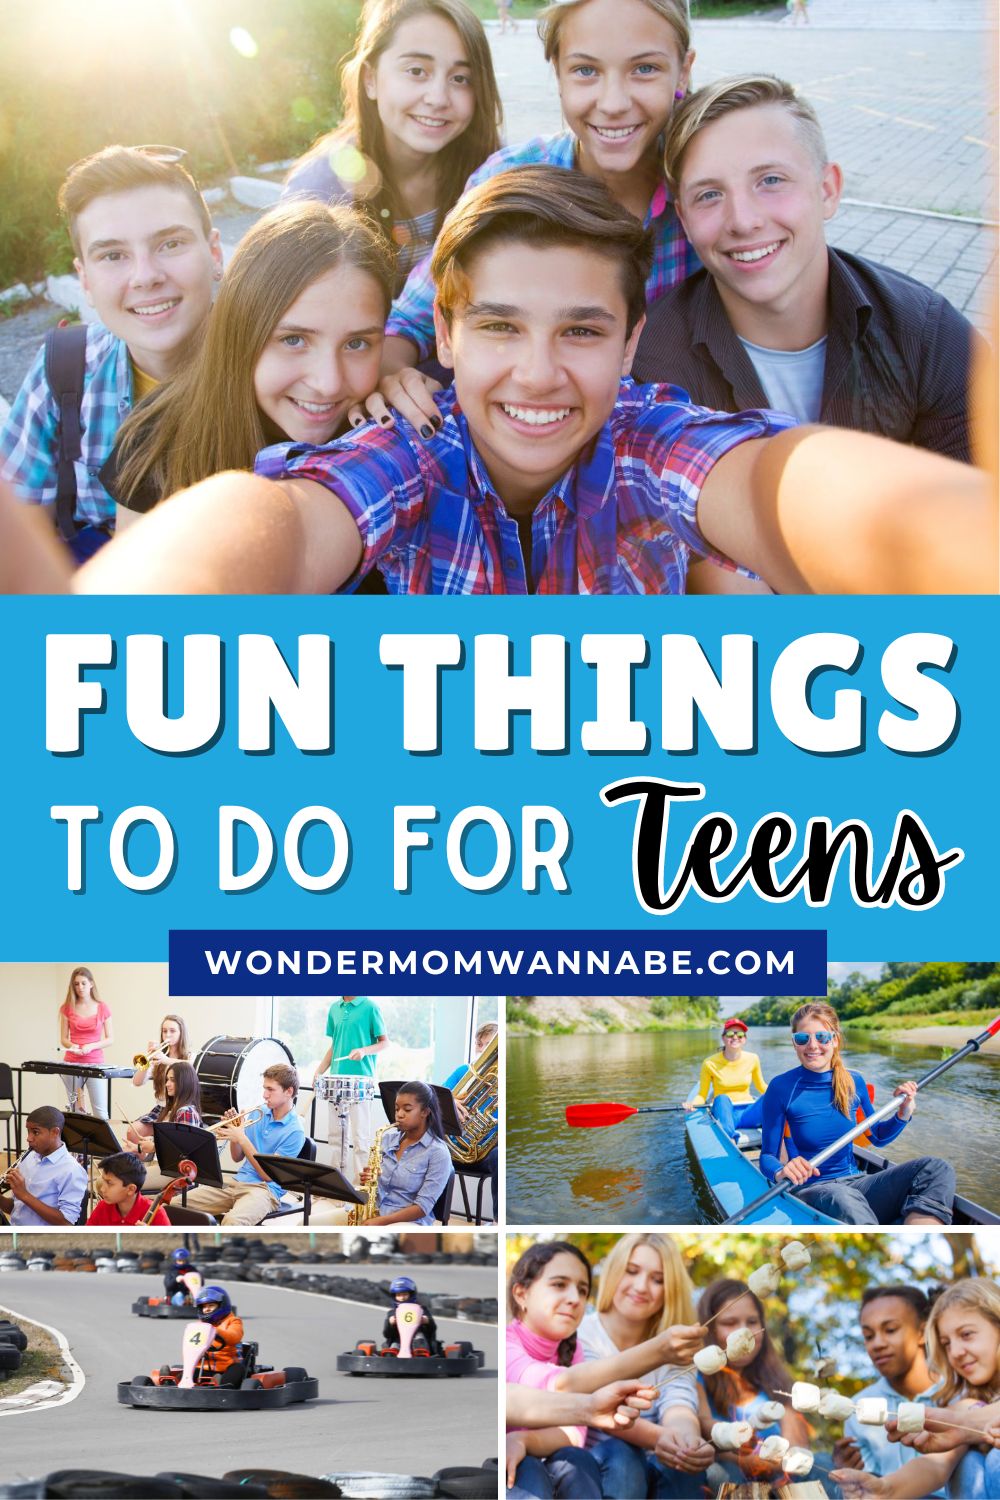 Discover exciting activities and events for teens.